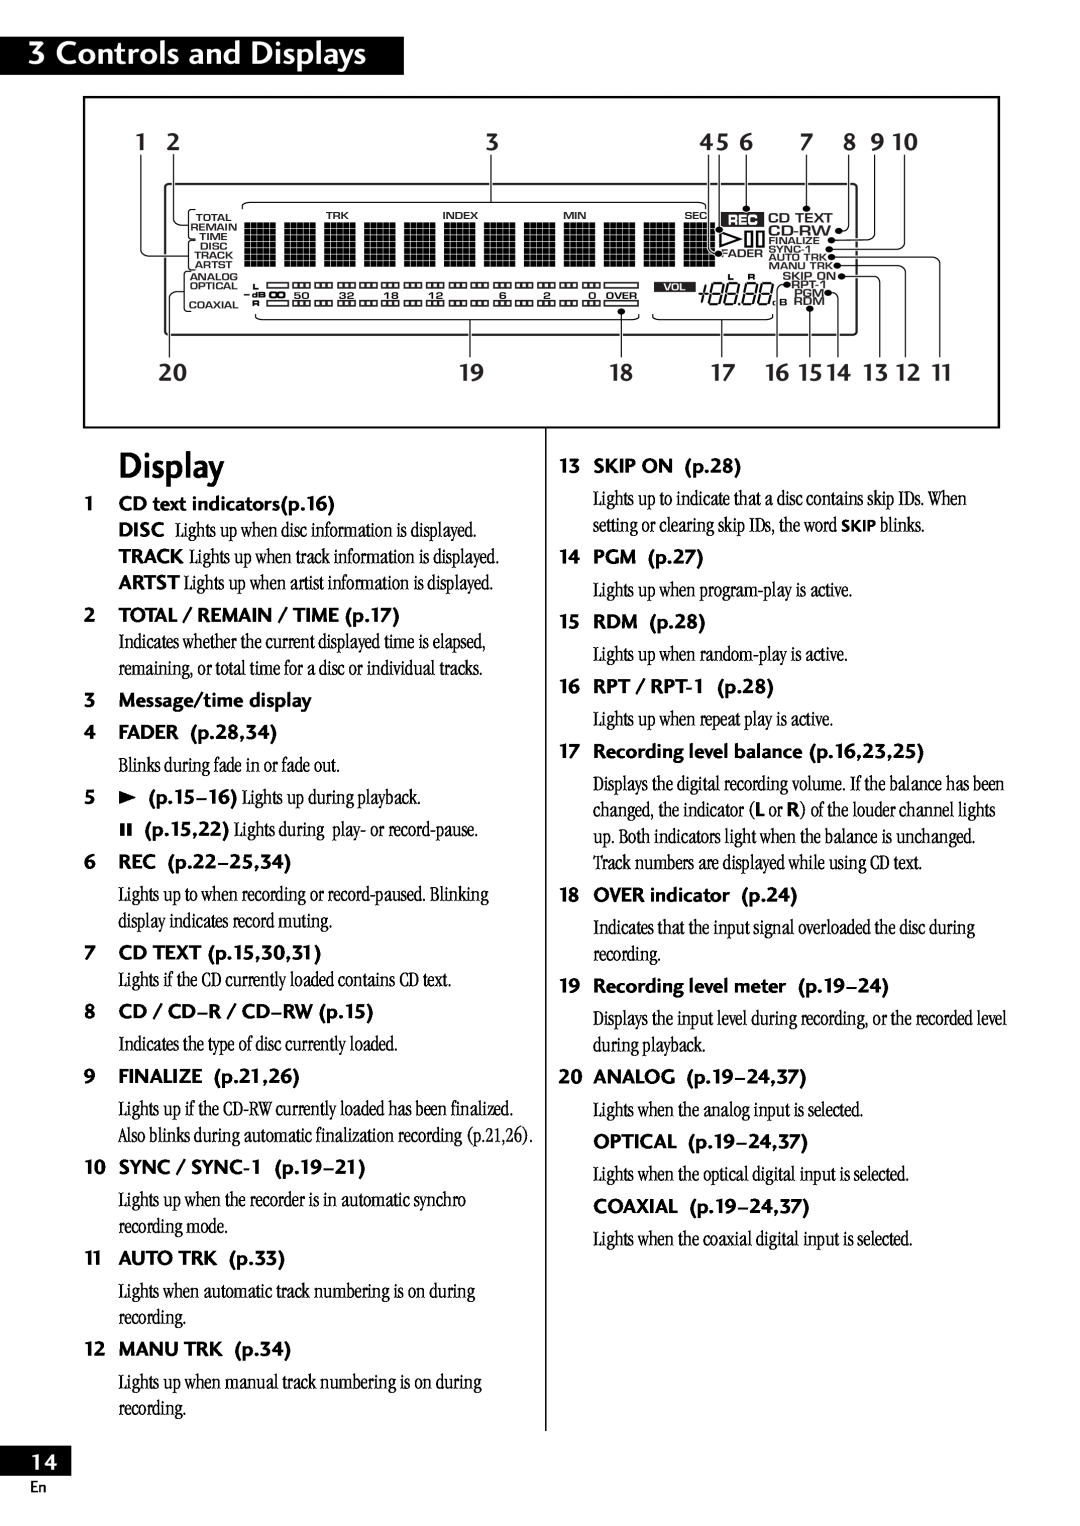 Pioneer PDR-609 operating instructions Display 